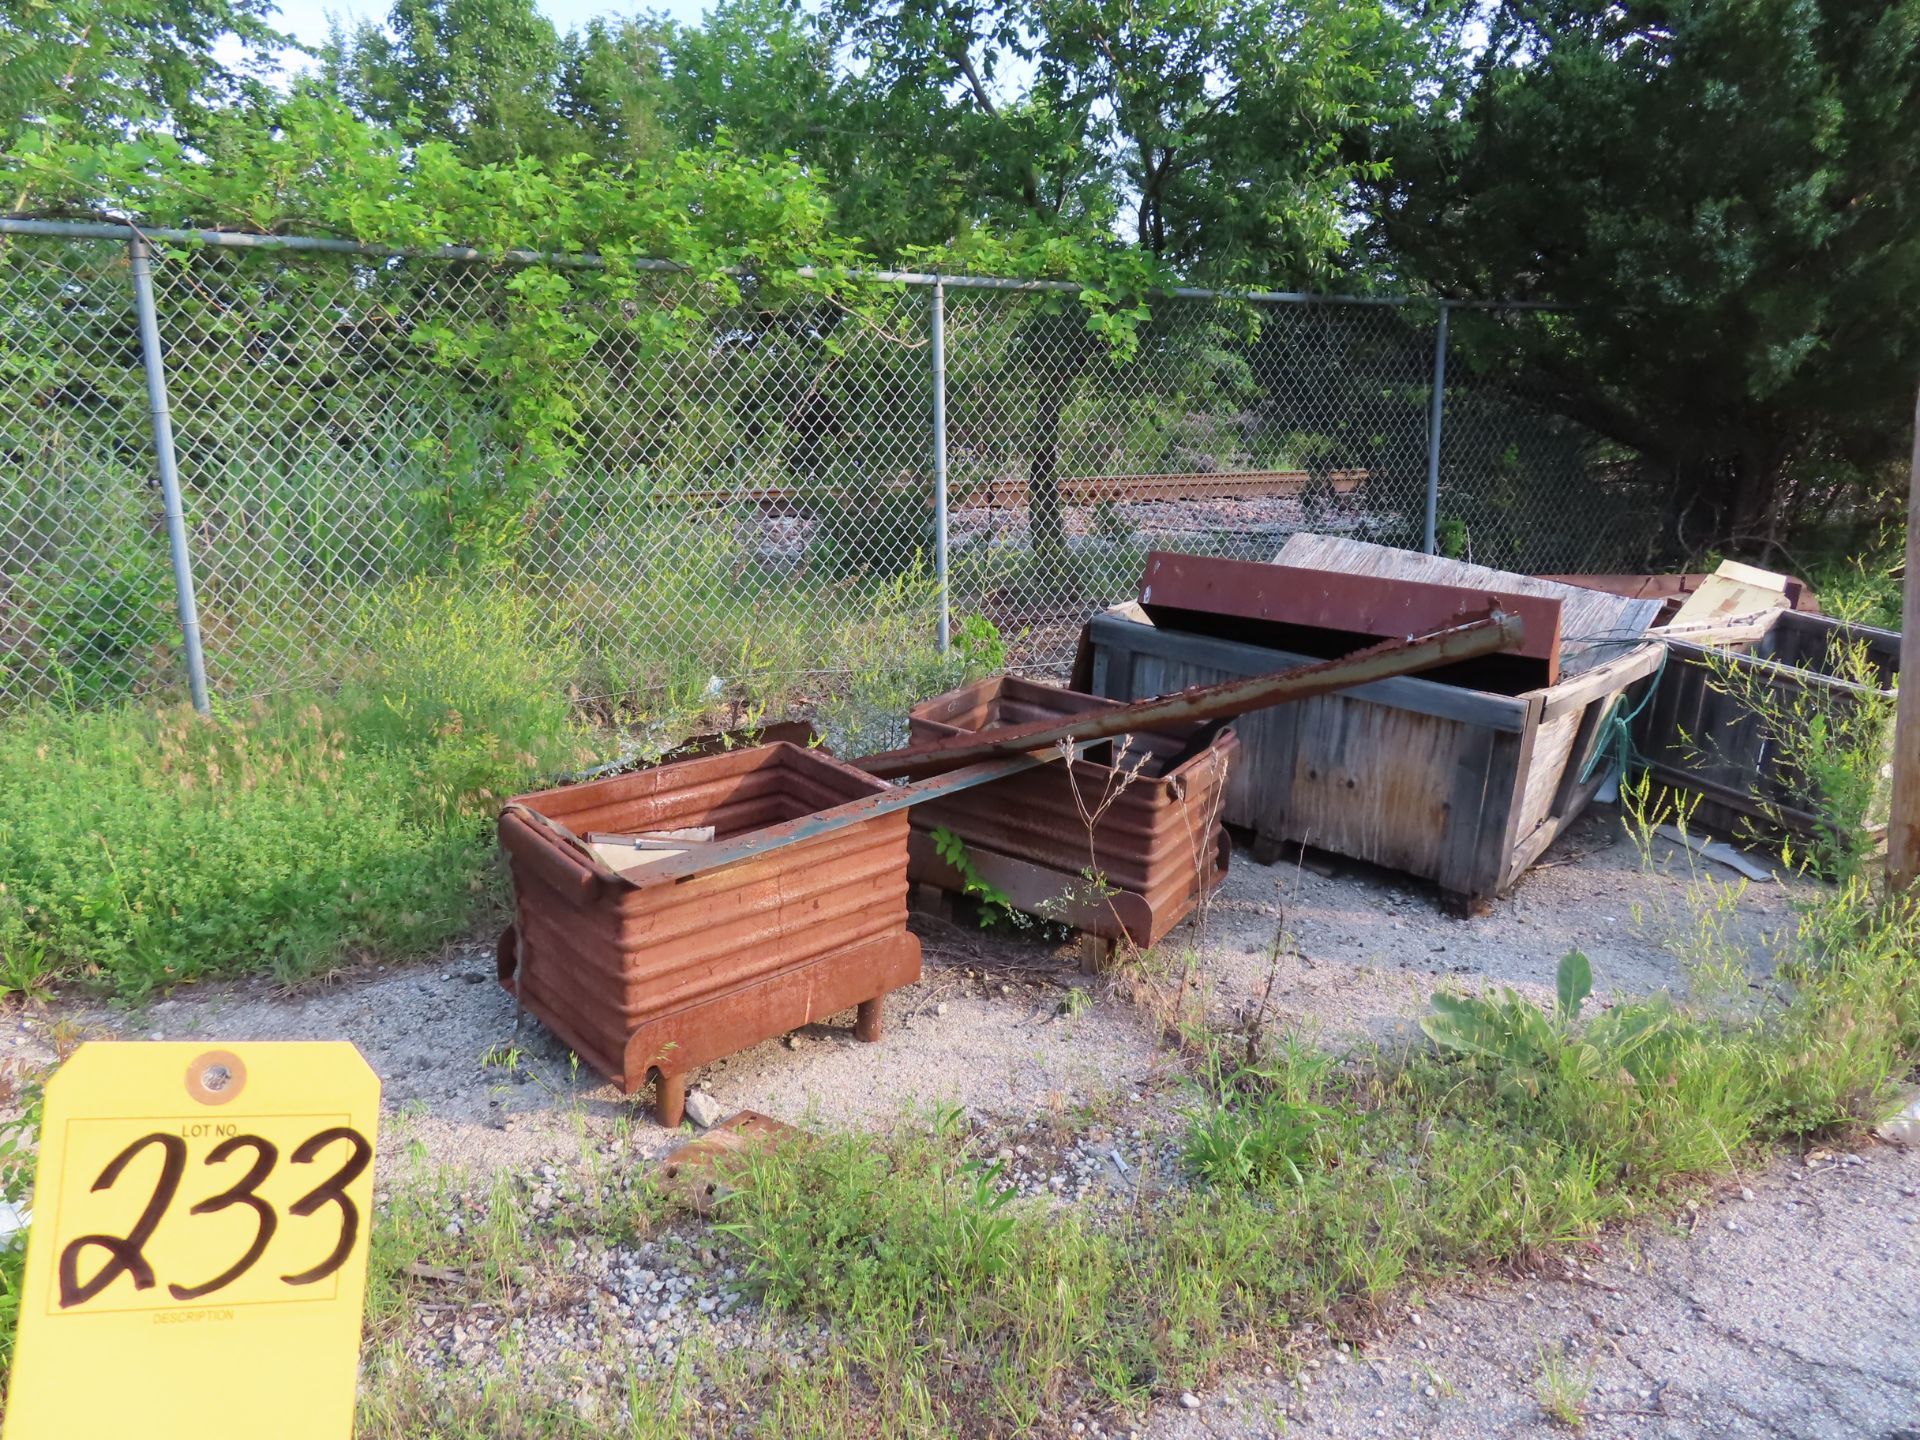 LOT MISC. TUBS & CRATES ALONG FENCE LINEBLDG: 1 - LOT MISC. TUBS & CRATES ALONG FENCE LINE